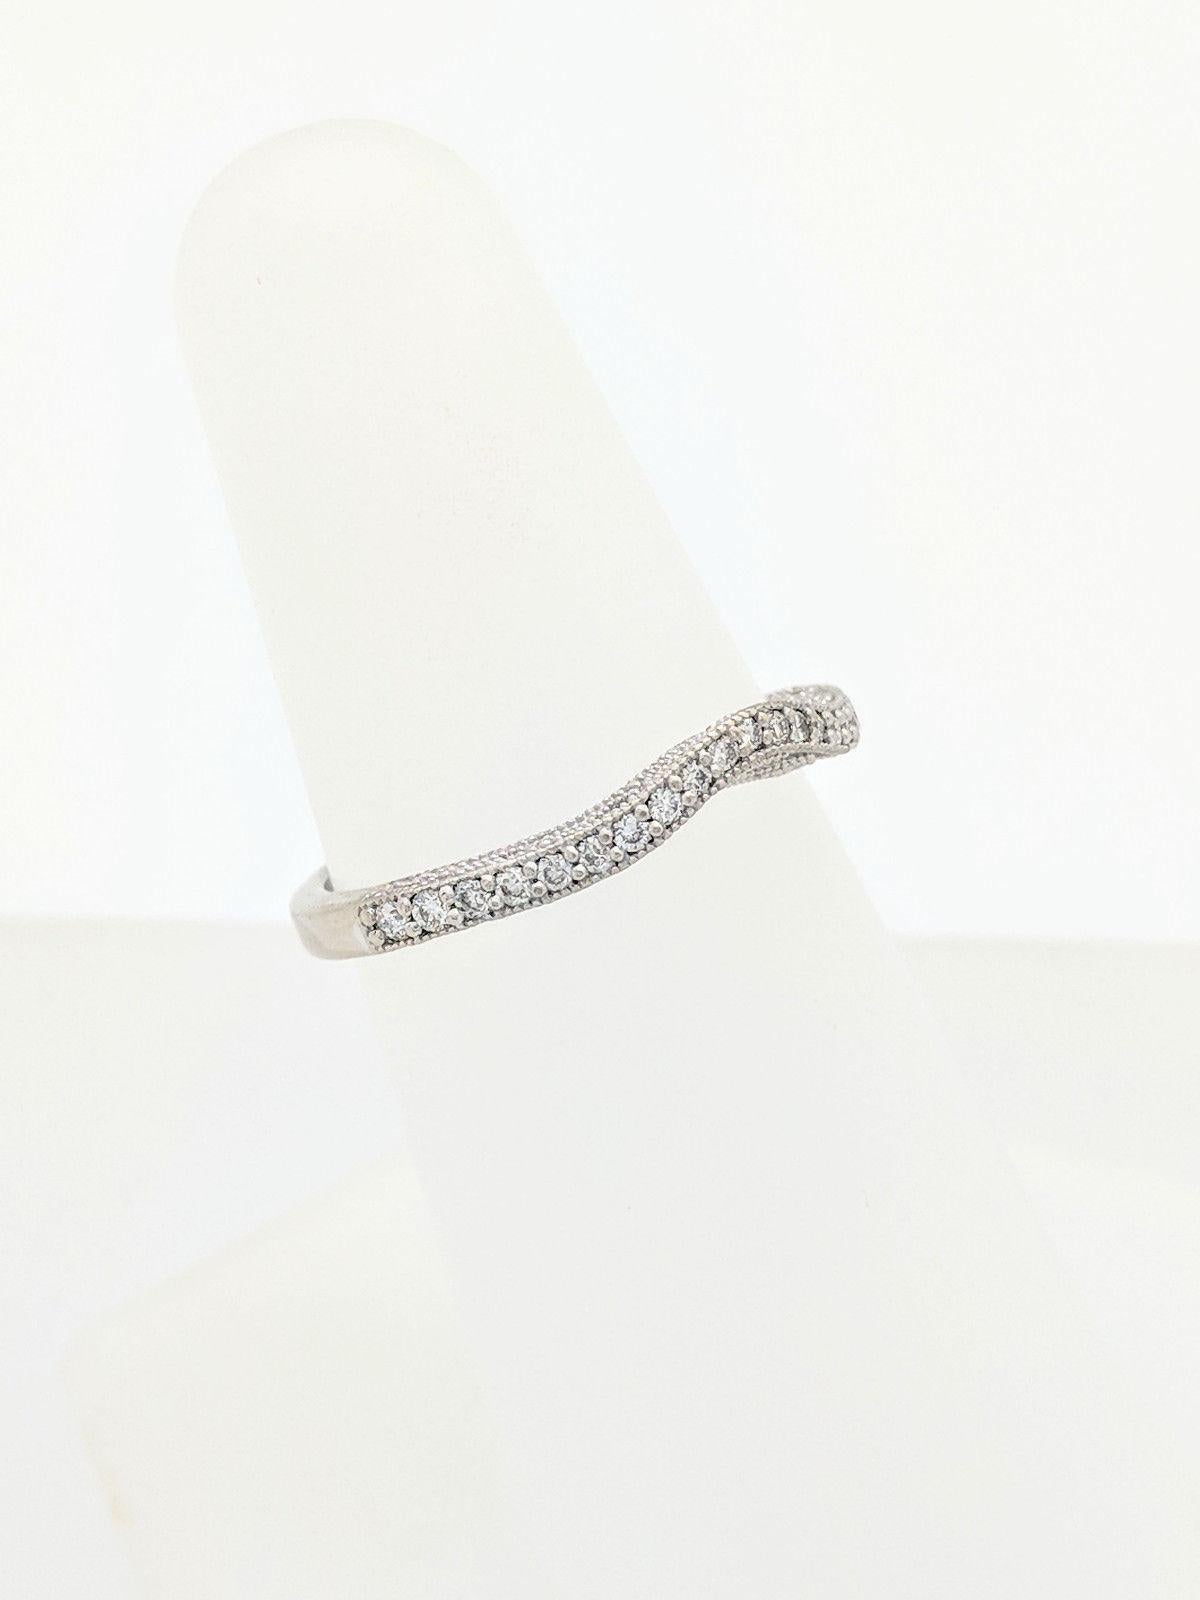 You are viewing a Beautiful Pave Diamond Curved Wedding Band. This band is crafted from 14k white gold and weigh 2.6 grams. This ring features (21) natural round brilliant cut diamonds that are individually prong set for a total carat weight of 0.21